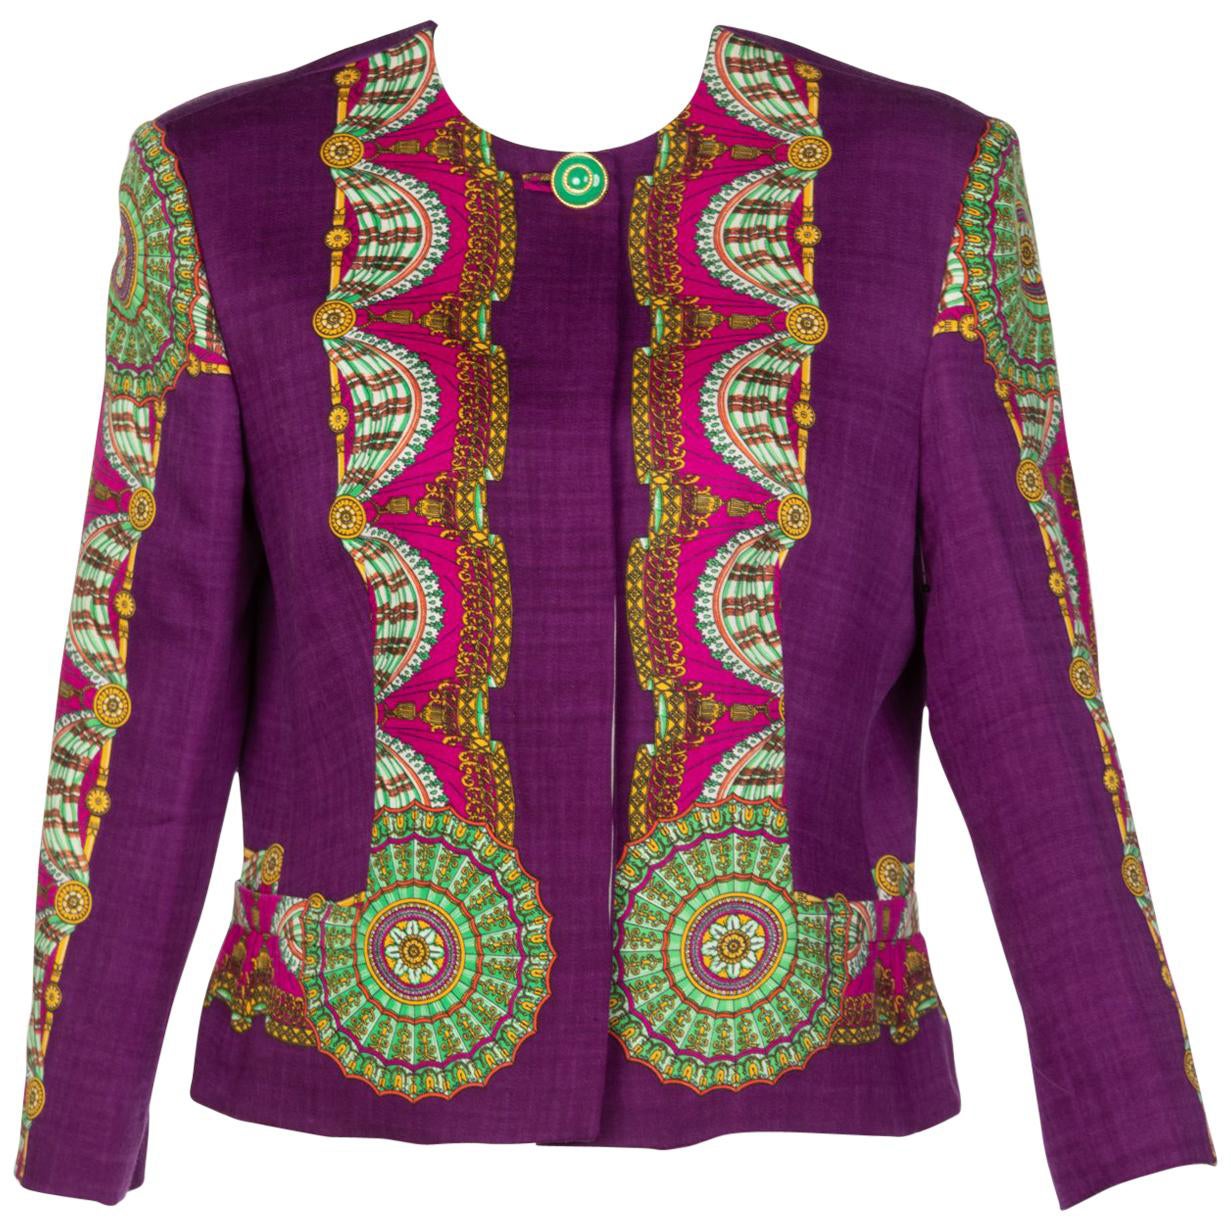 Gianni Versace Couture Purple Green Print Jacket, 1990s For Sale